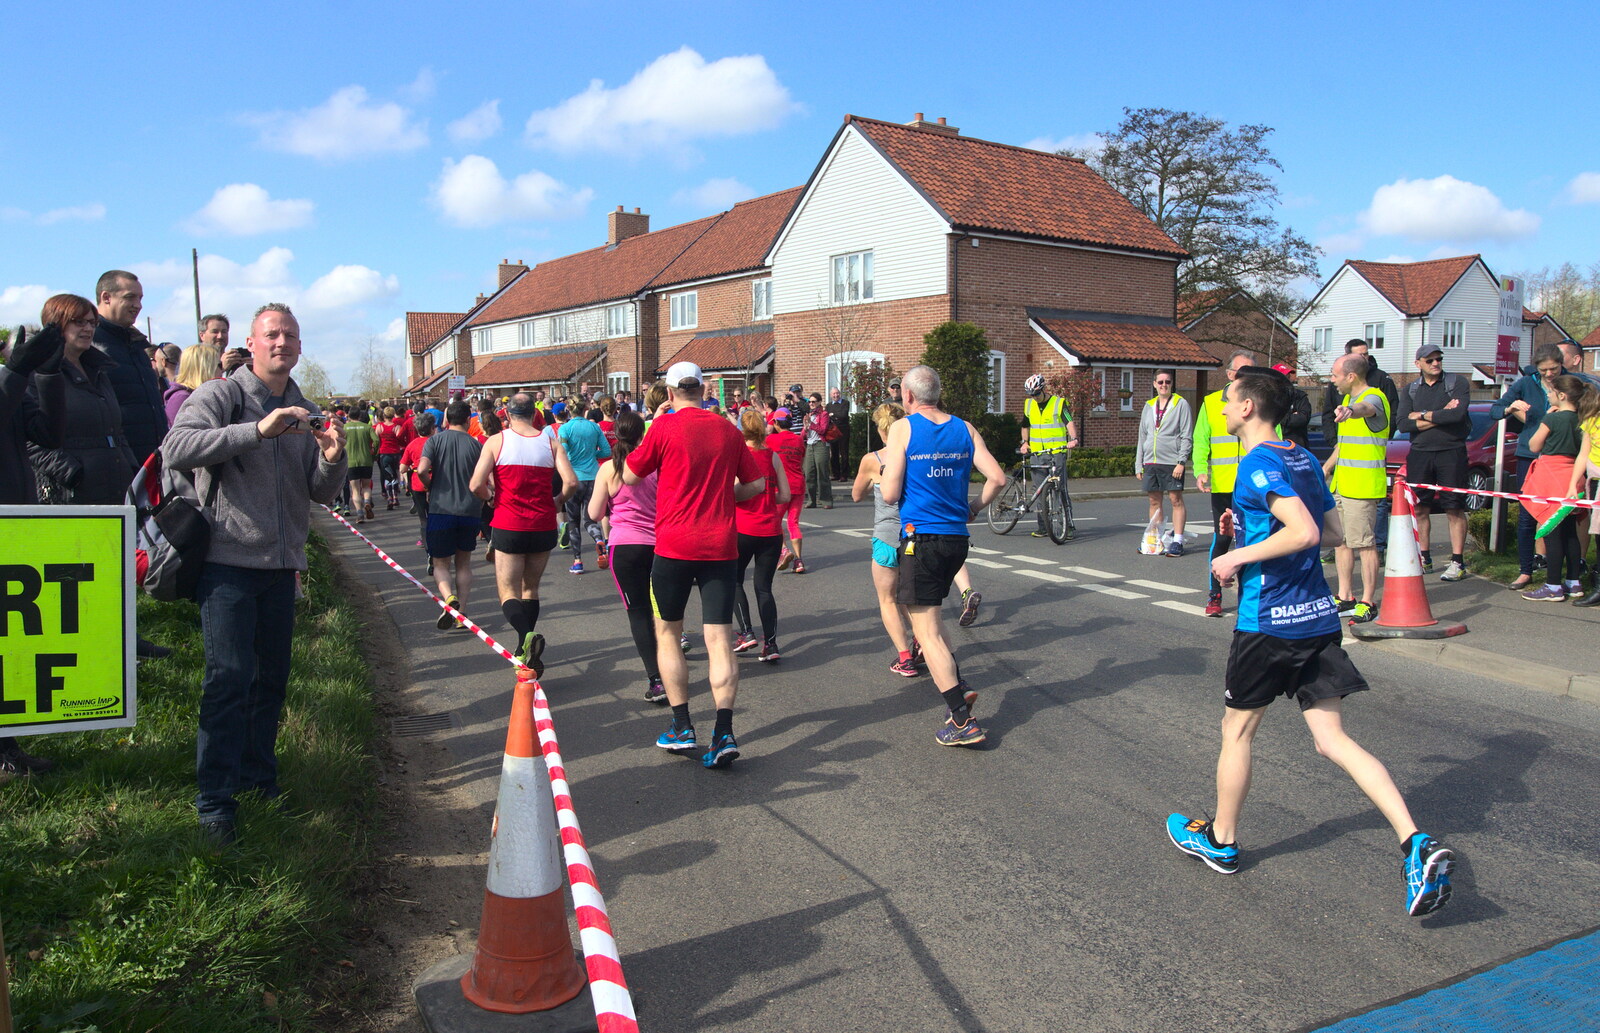 Runners head off up the road from The Black Dog Festival of Running, Bungay, Suffolk - 2nd April 2017